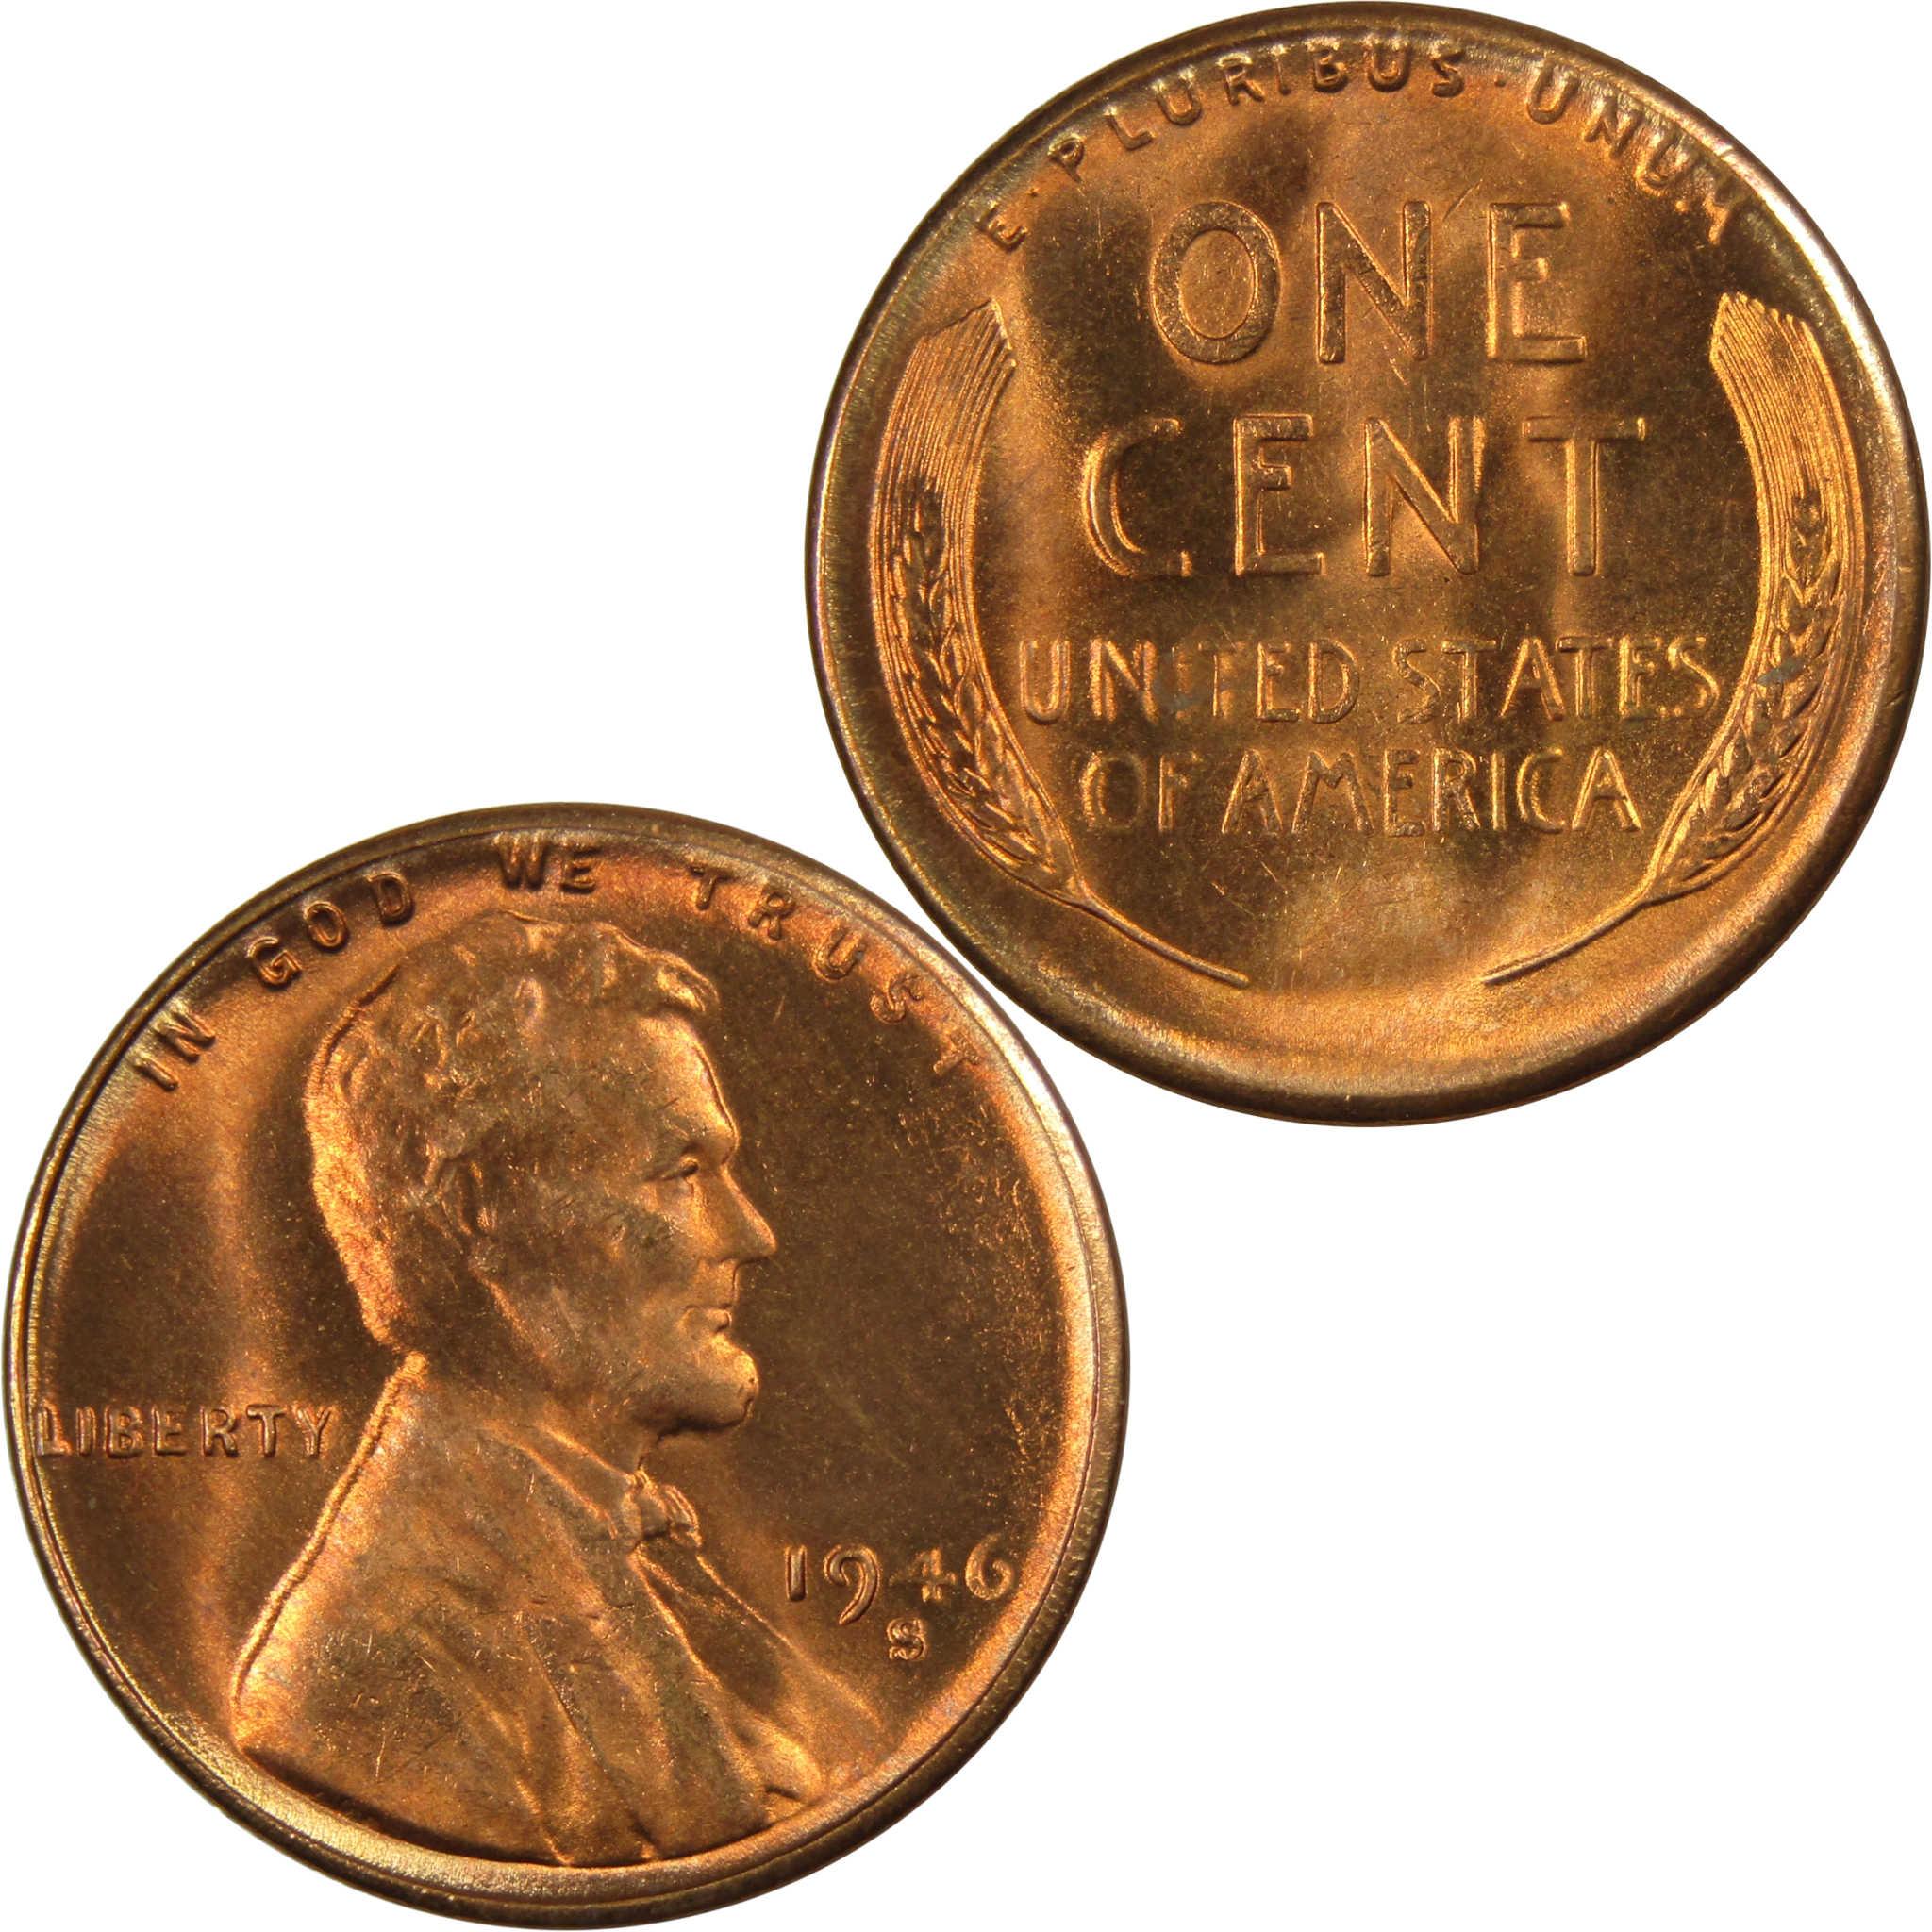 UNITED STATES WHEAT ONE CENT 1944 1946 APR07F